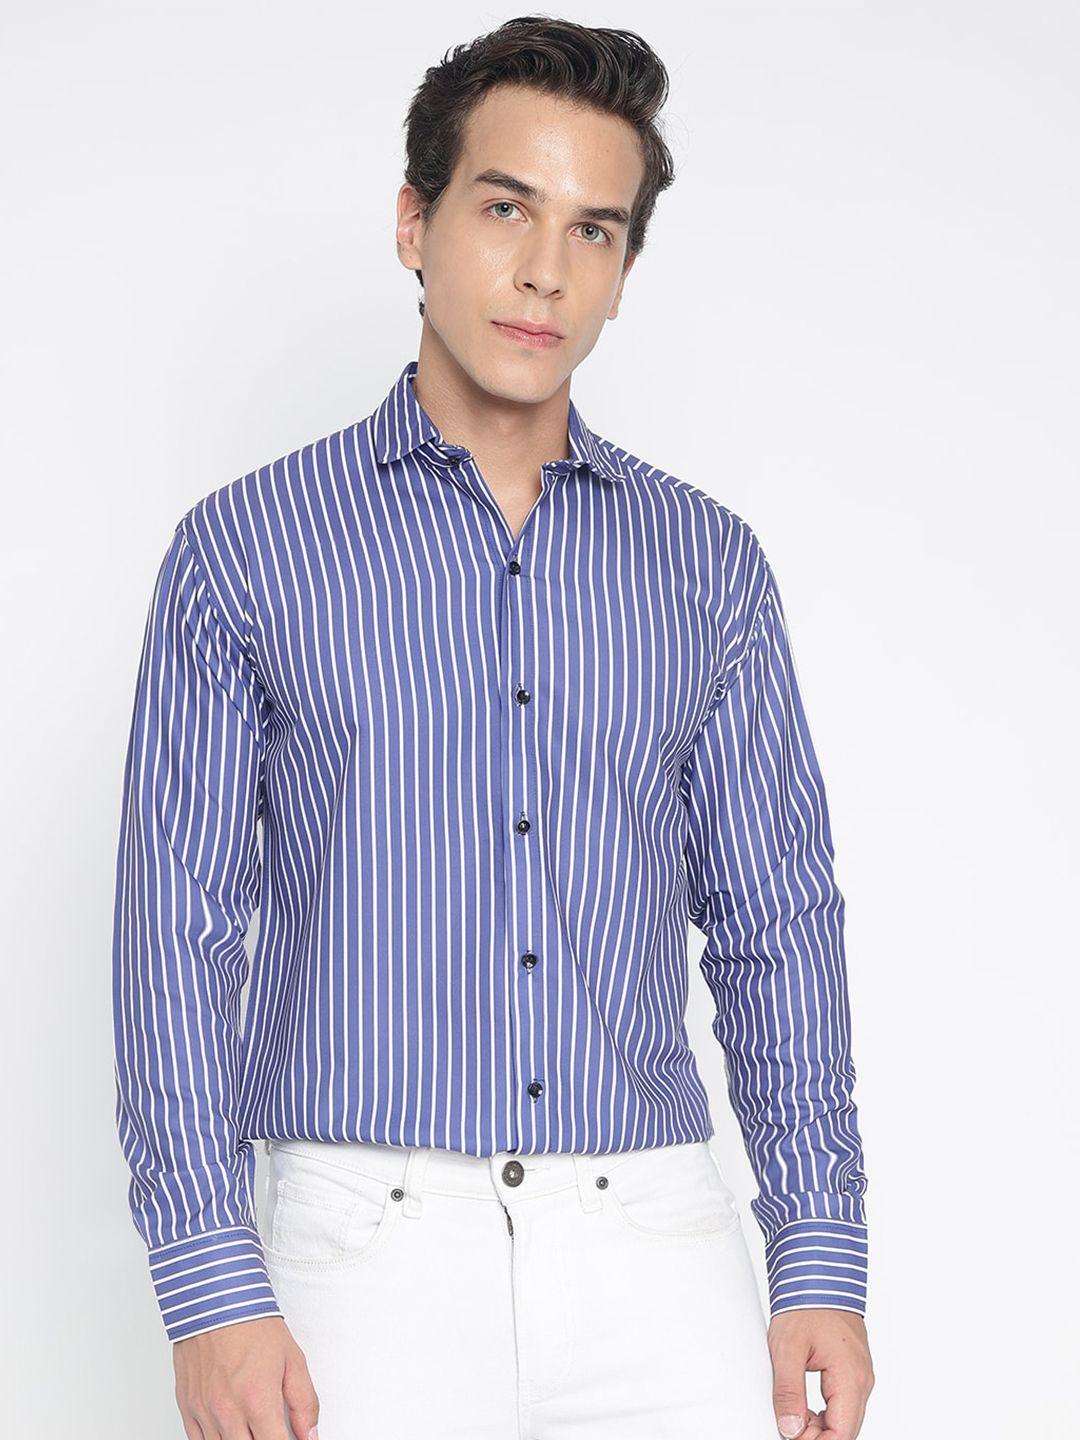 colorwings comfort slim fit striped casual shirt